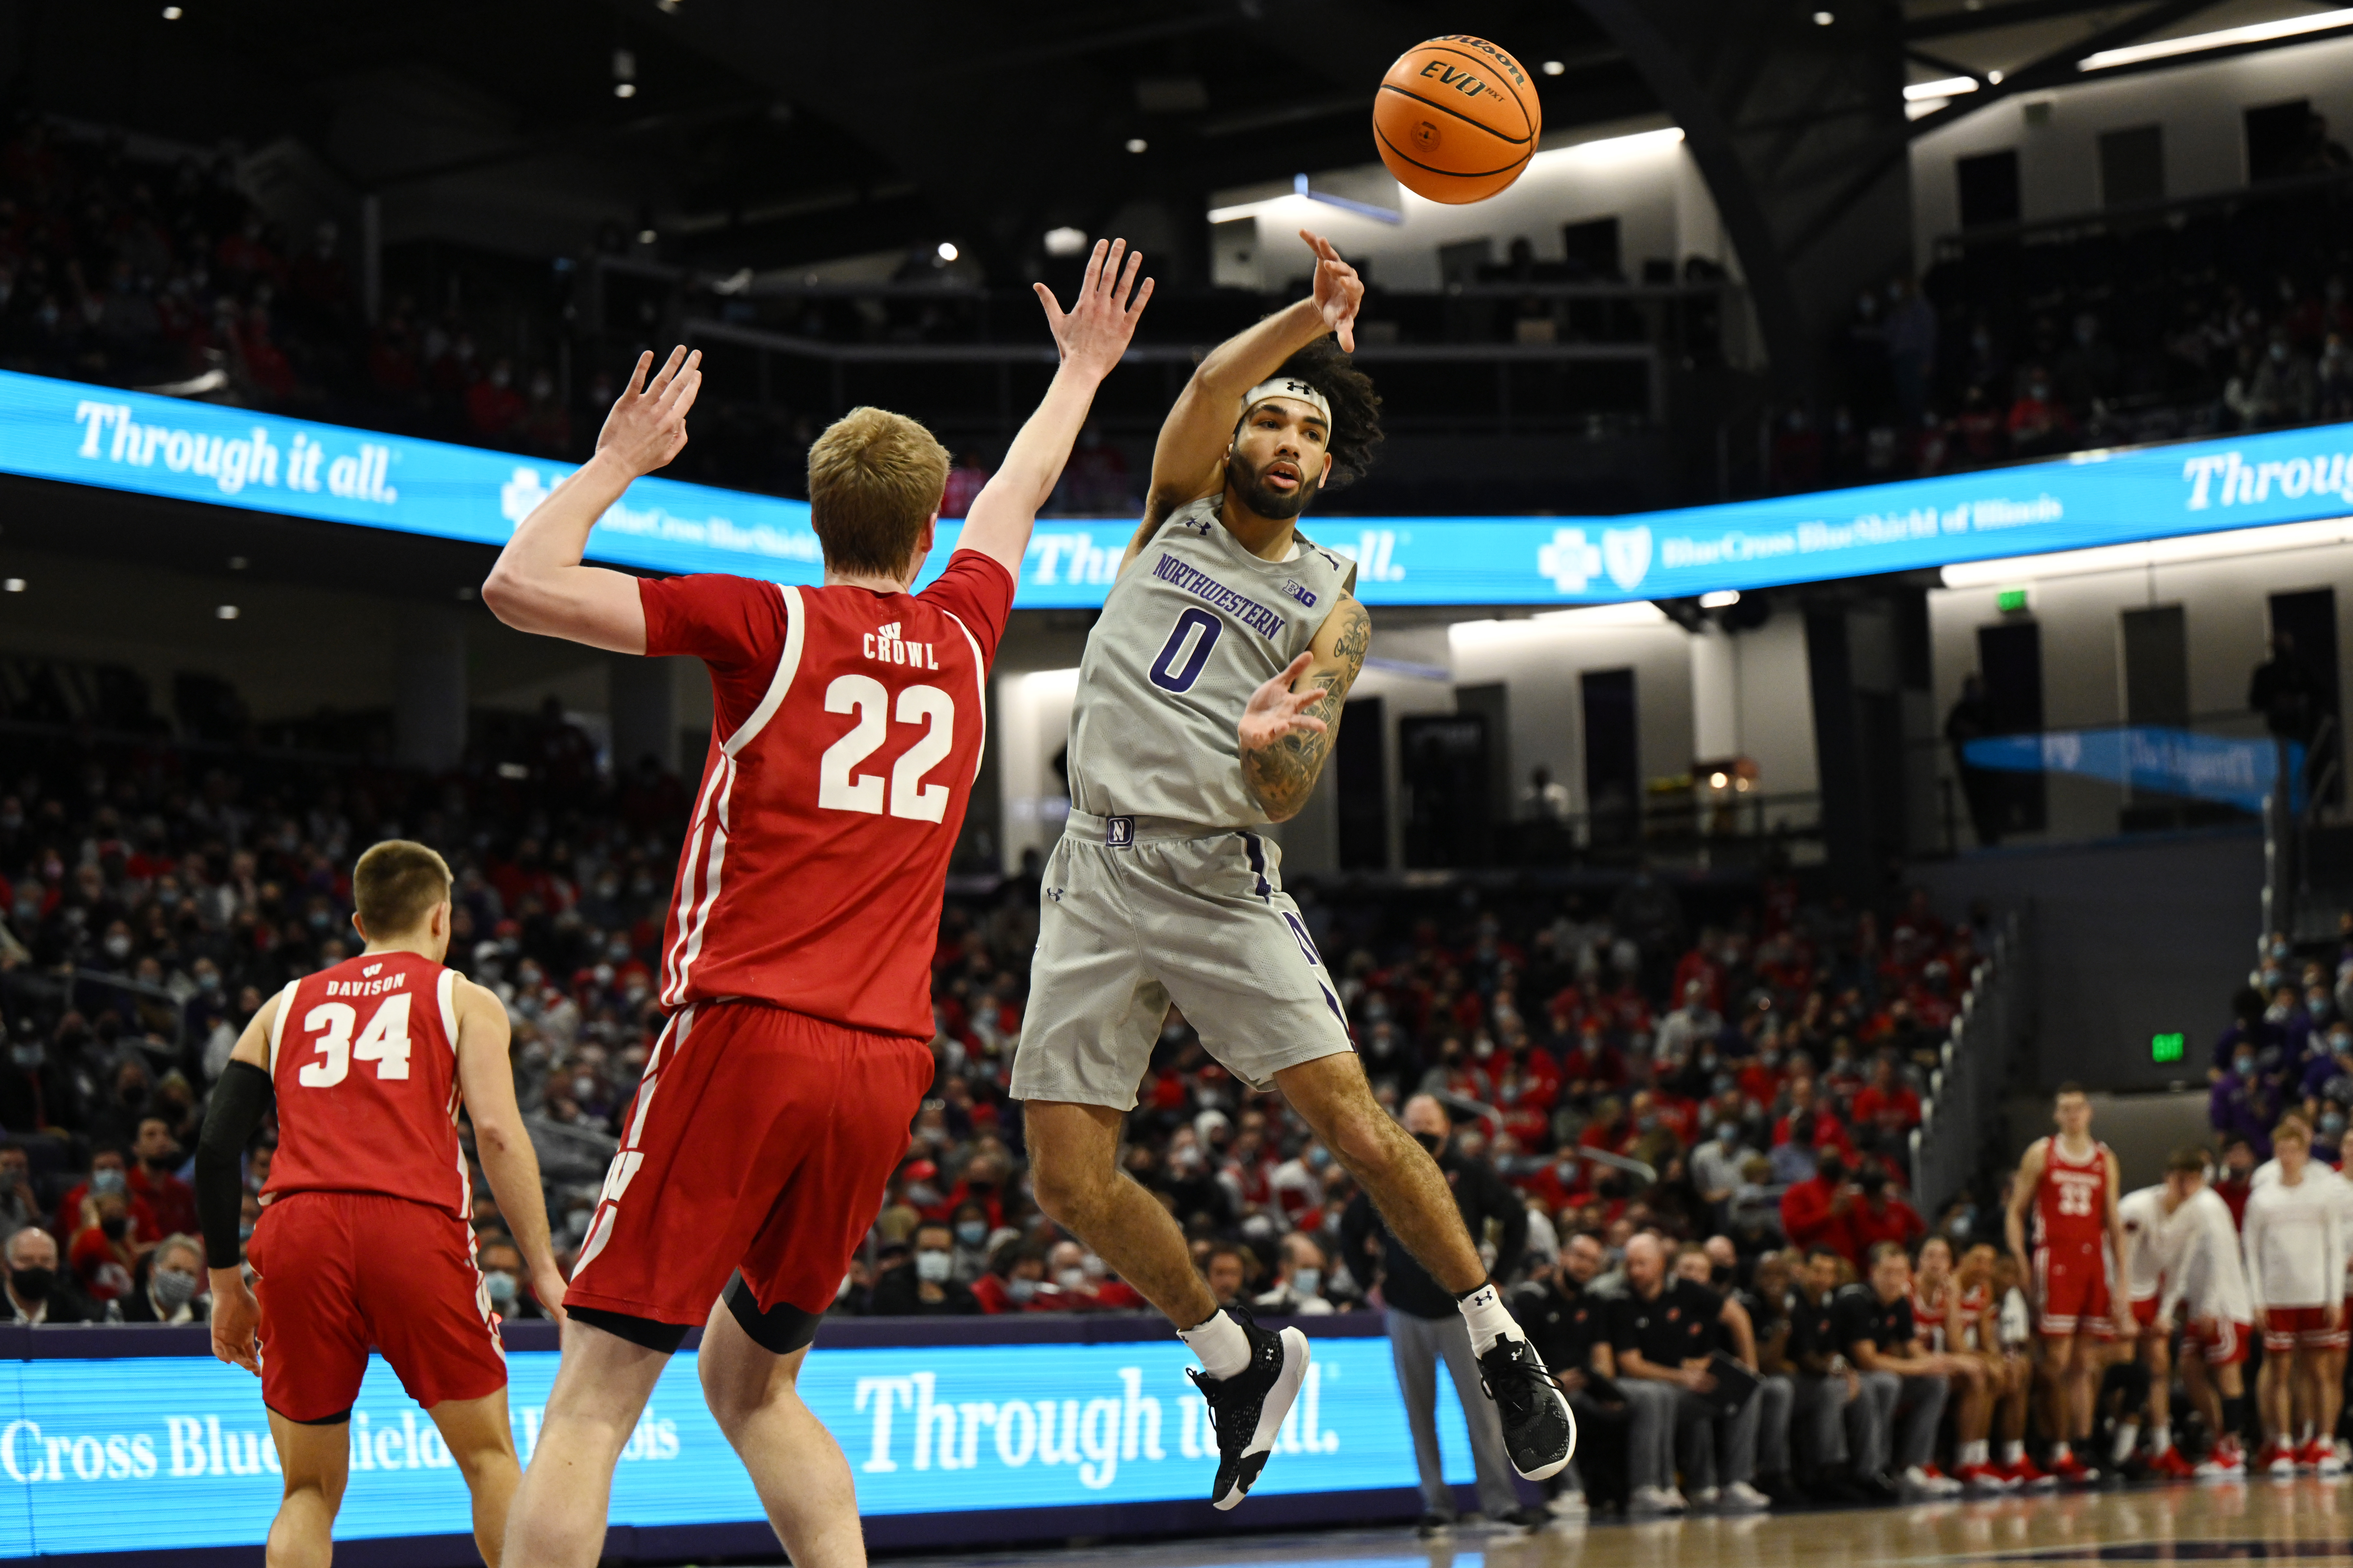 Northwestern Falls To Wisconsin For Fifth Loss In Six Games